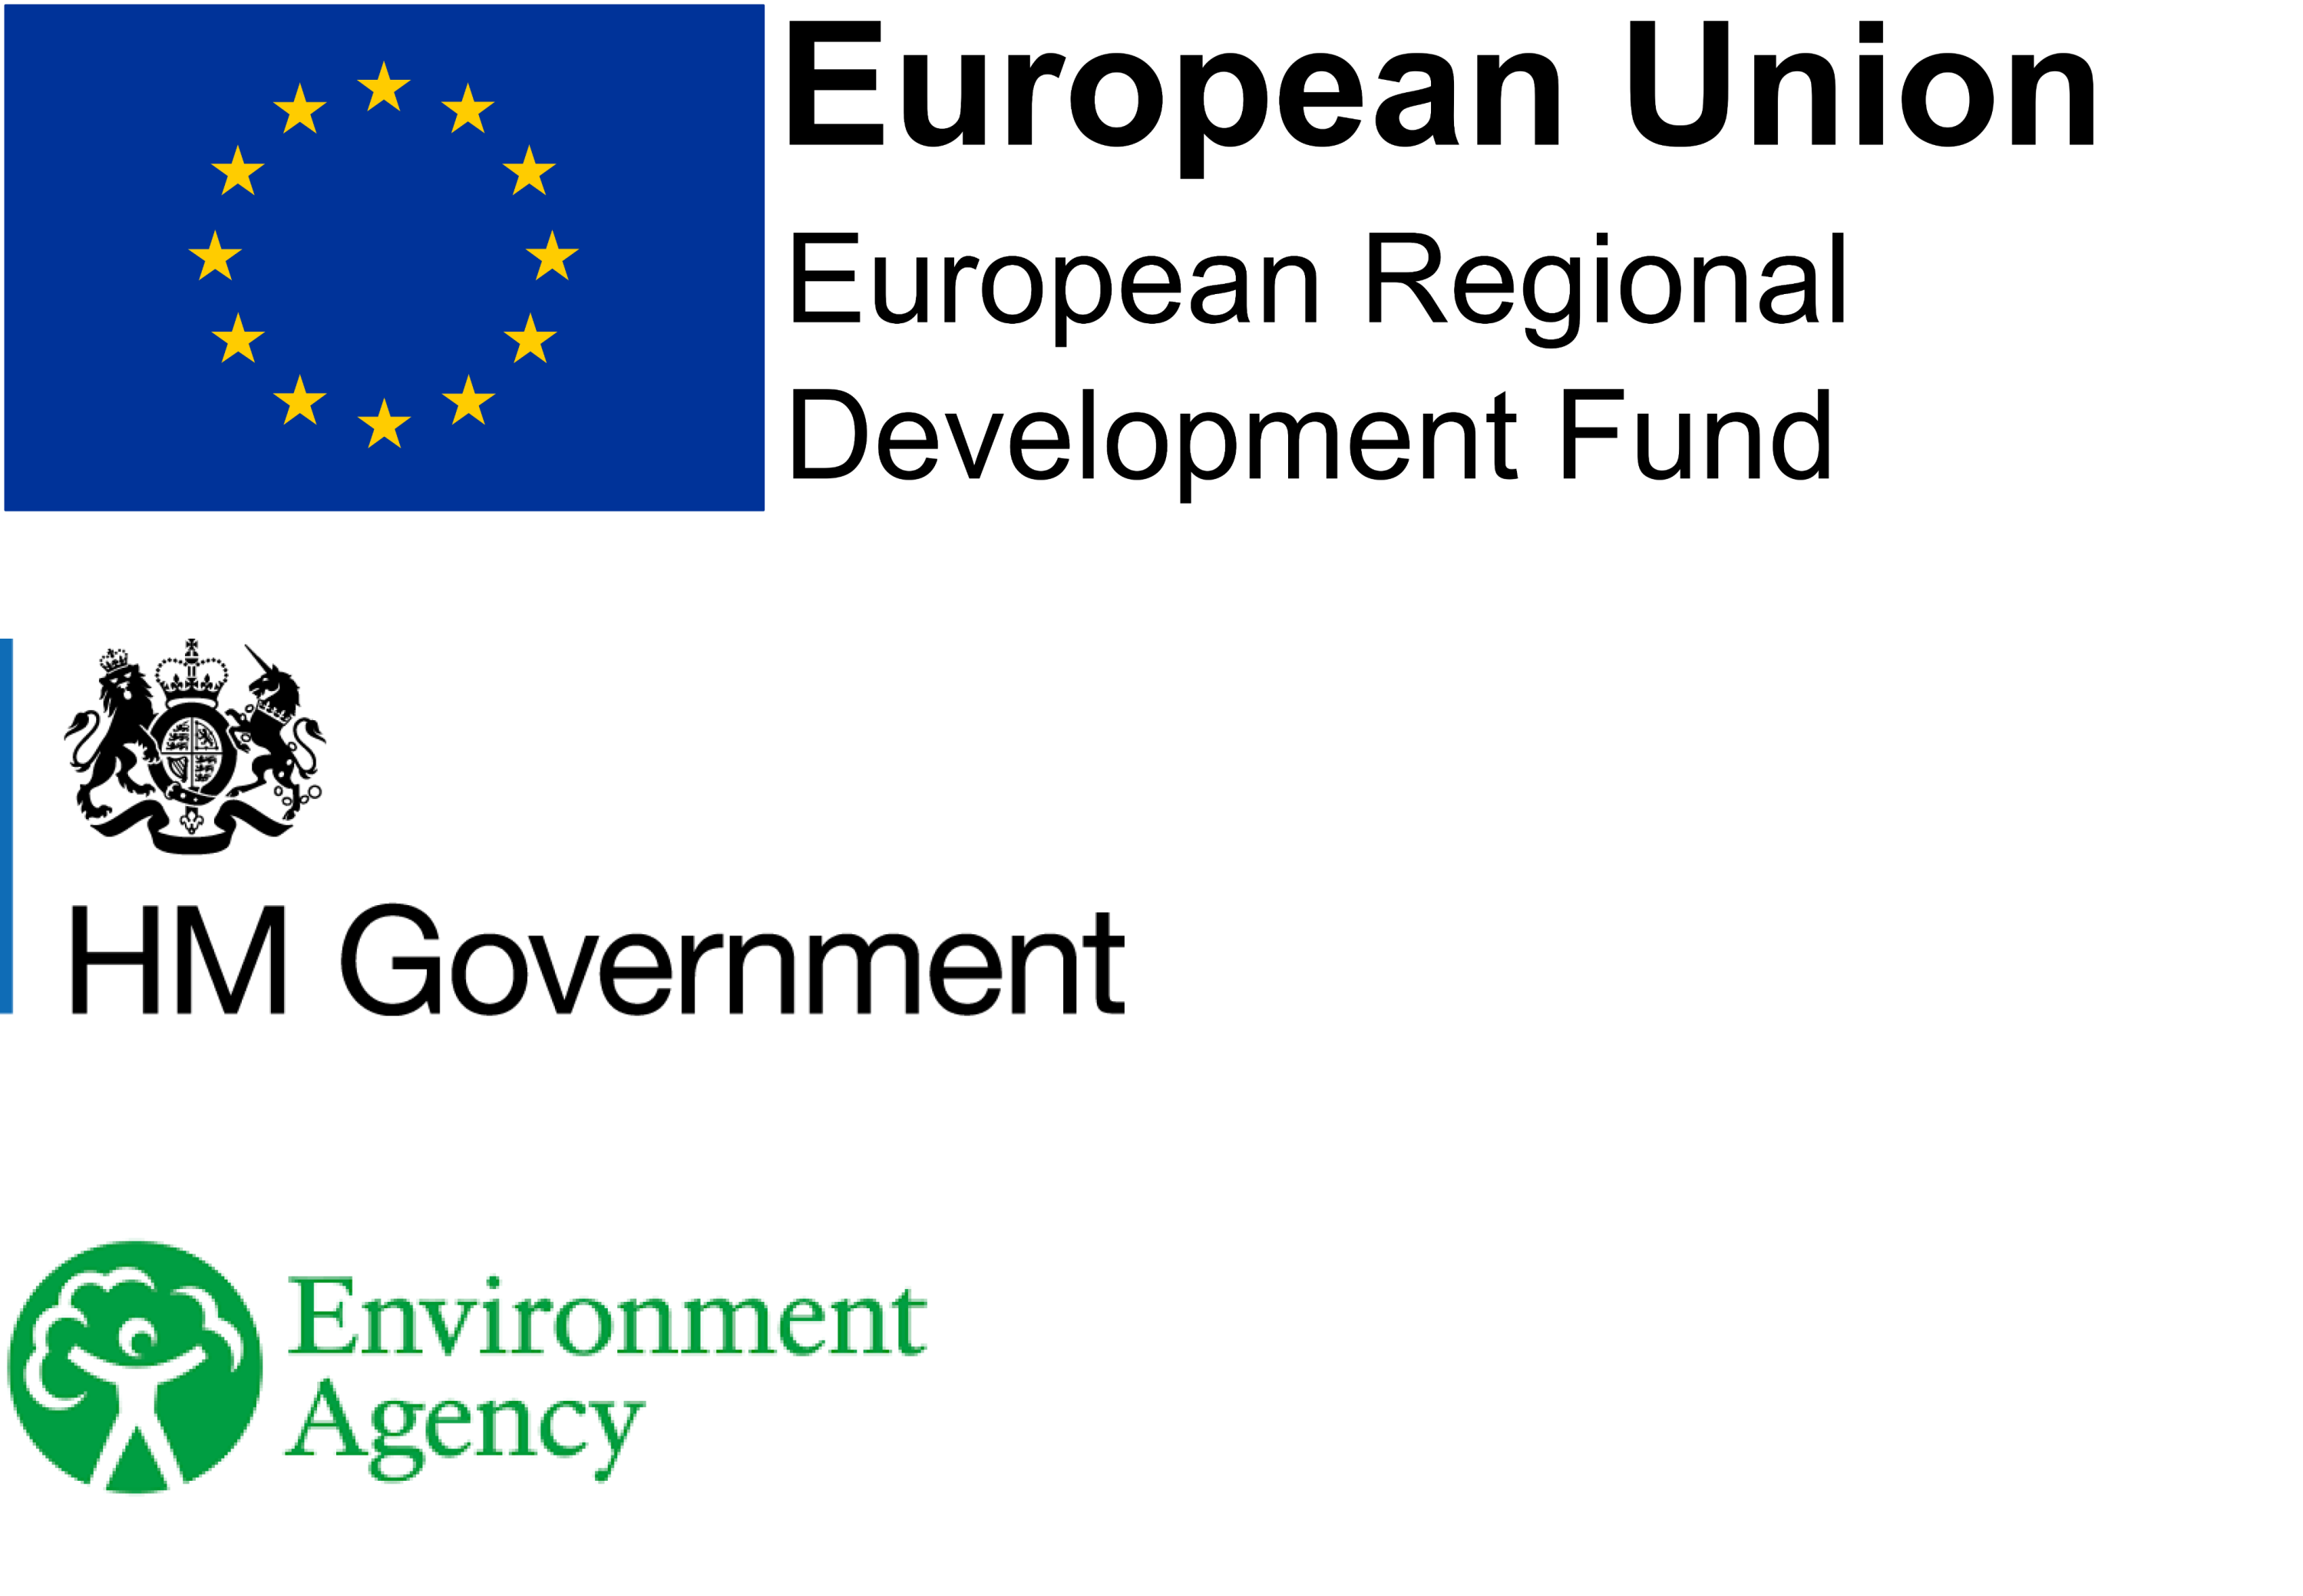 European Regional Development Fund, HM Government and Environment Agency logos